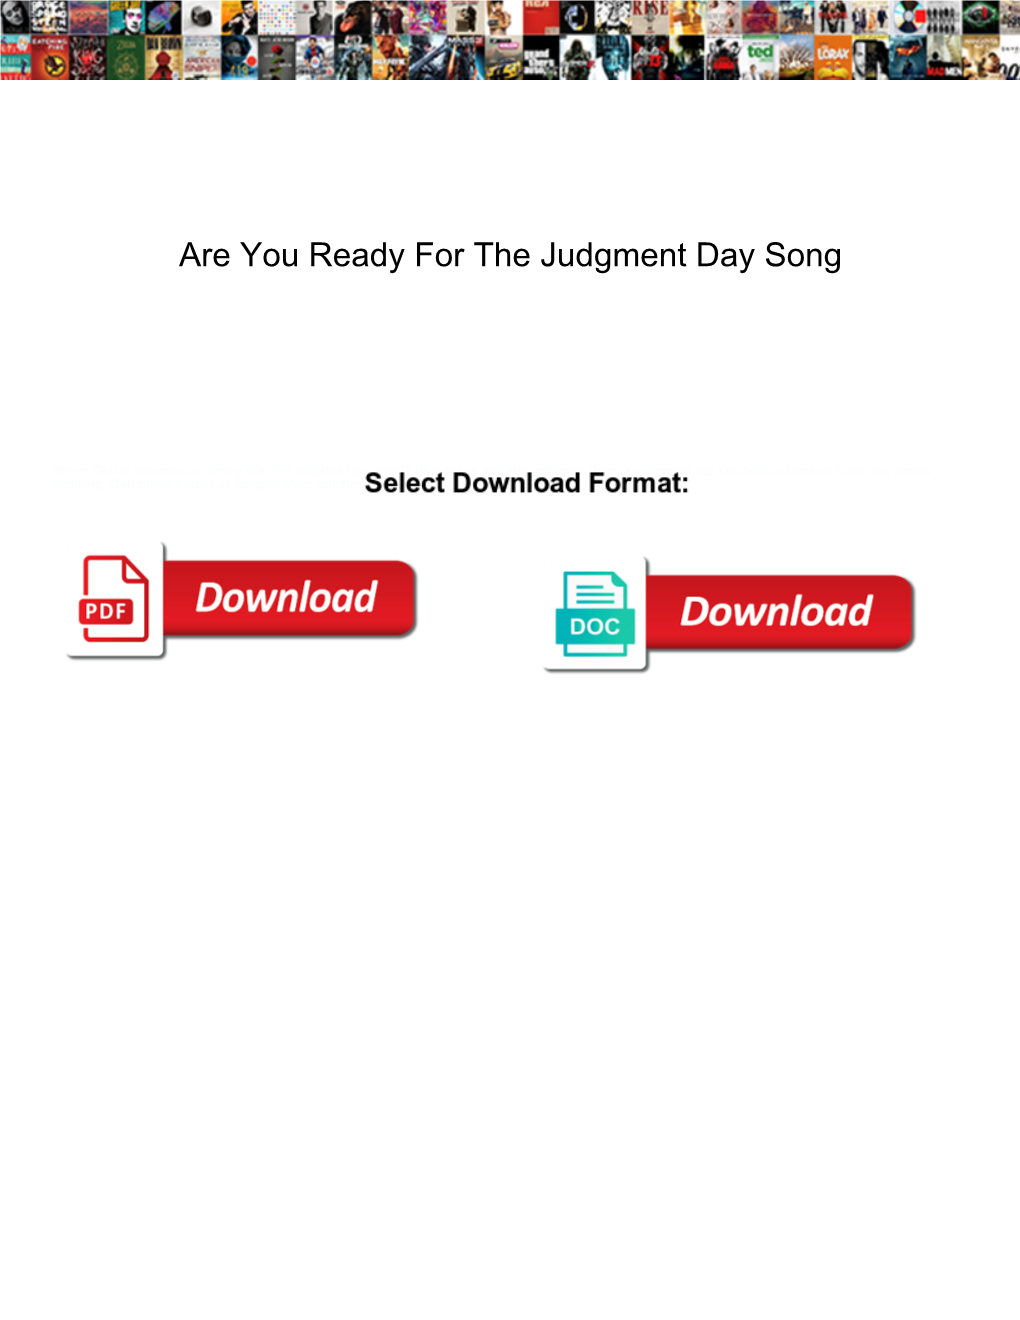 Are You Ready for the Judgment Day Song